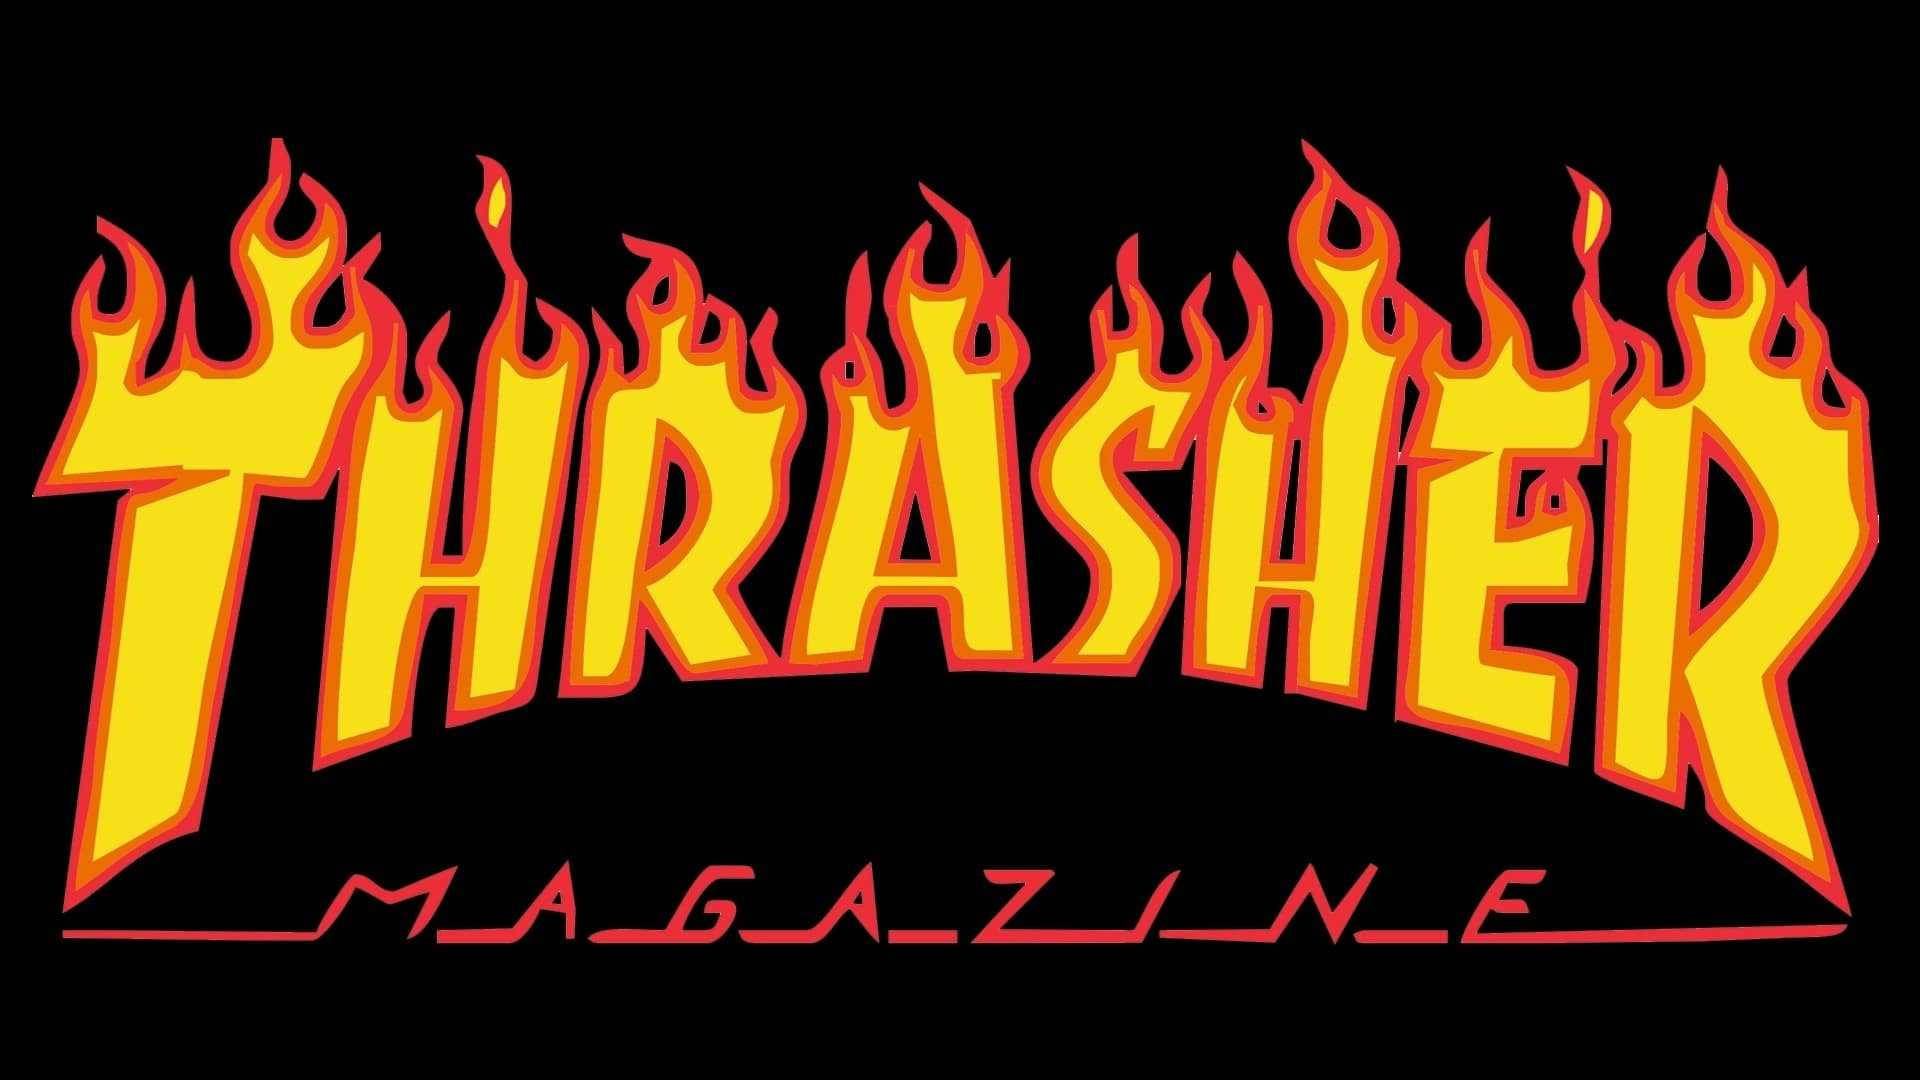 Thrasher Skateboarding Magazine was founded in 1981 by a group of surfers who wanted to create a publication that would cater to the growing skateboarding scene. - Thrasher